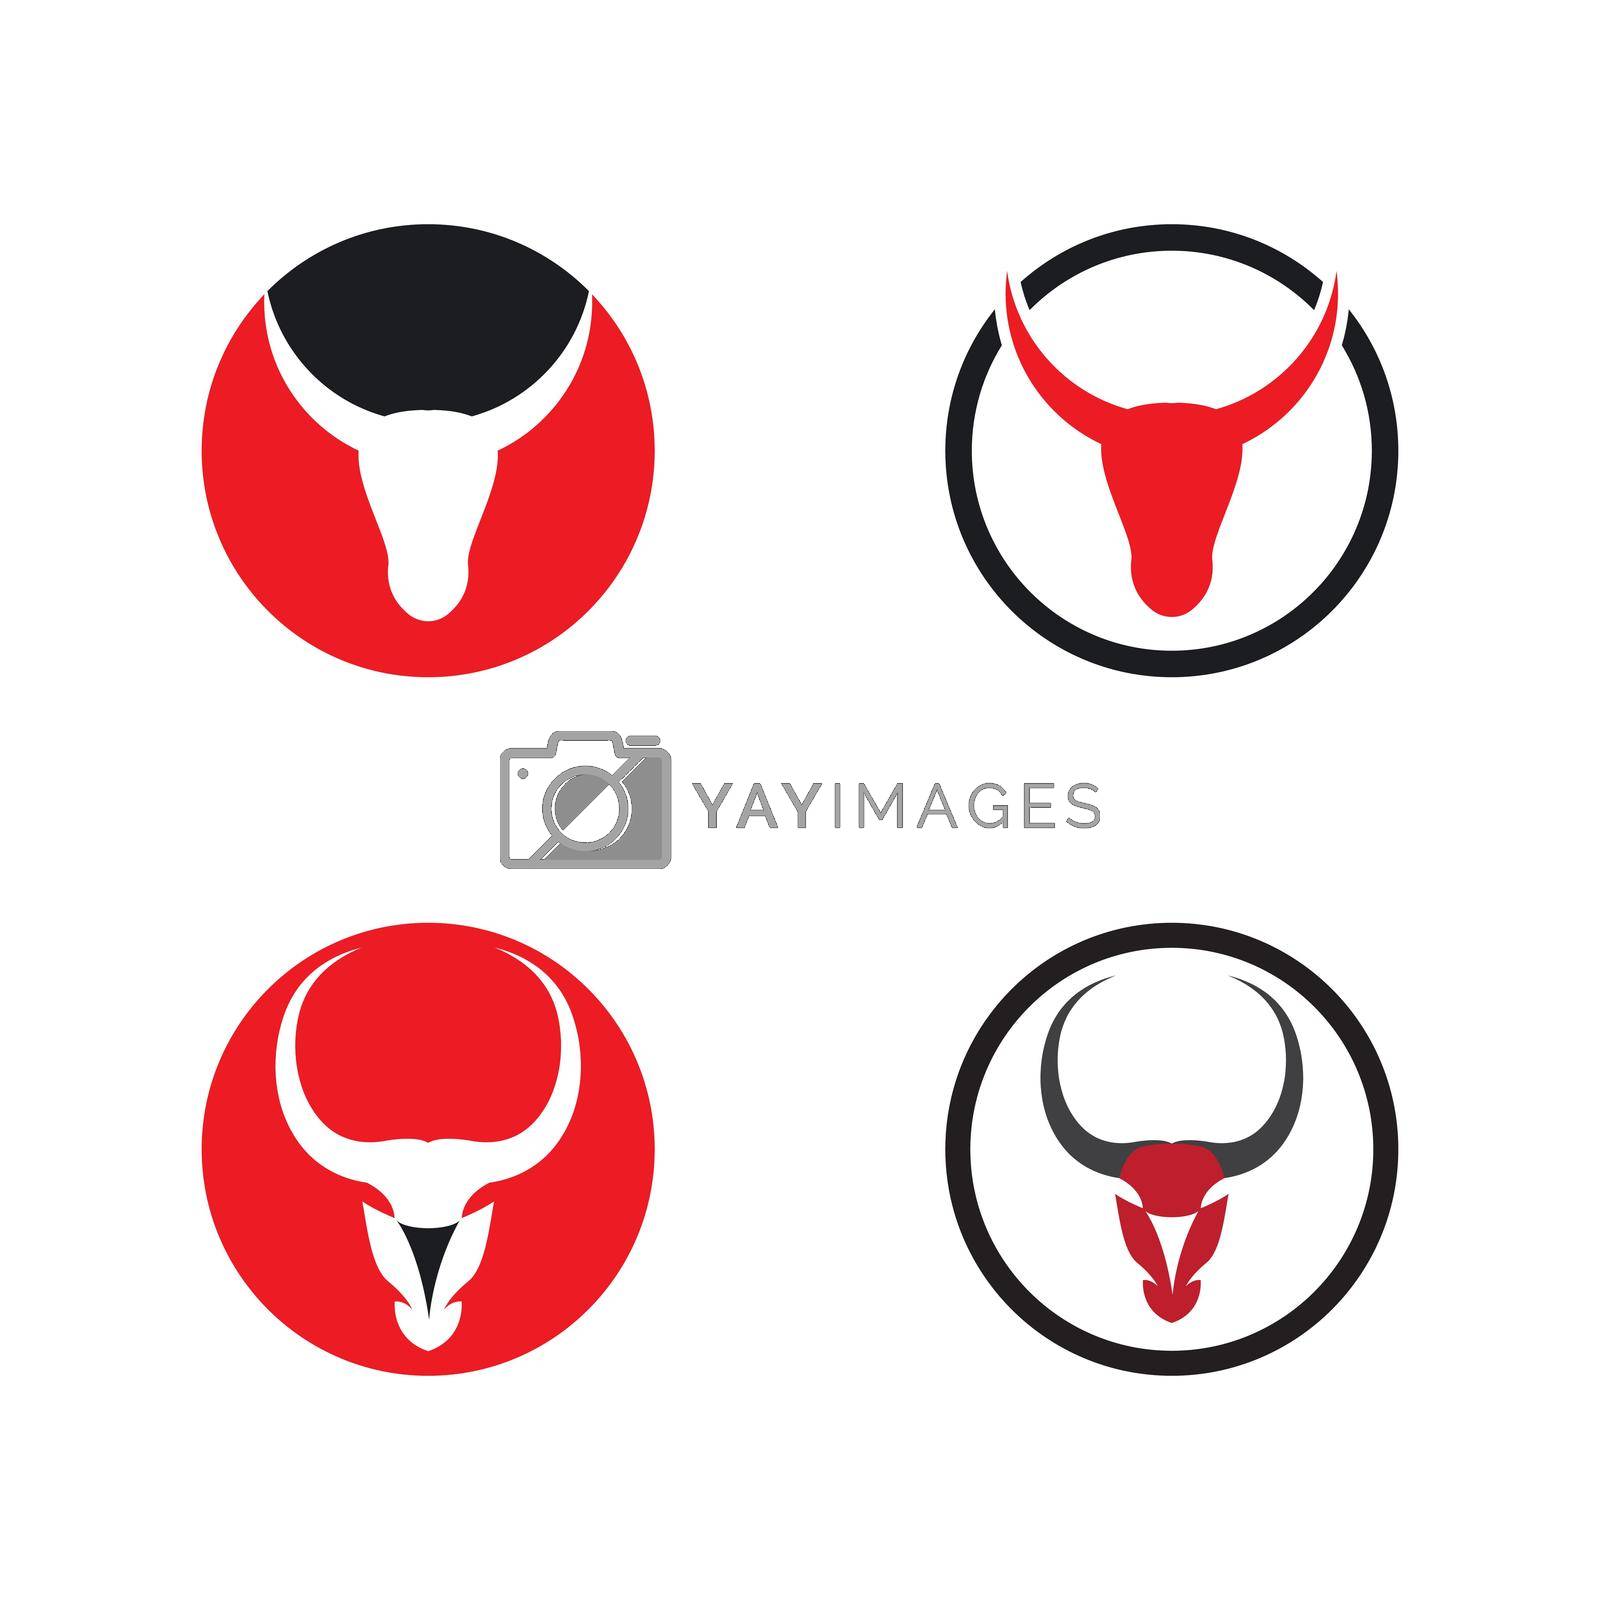 Royalty free image of Bull Logo vector by awk